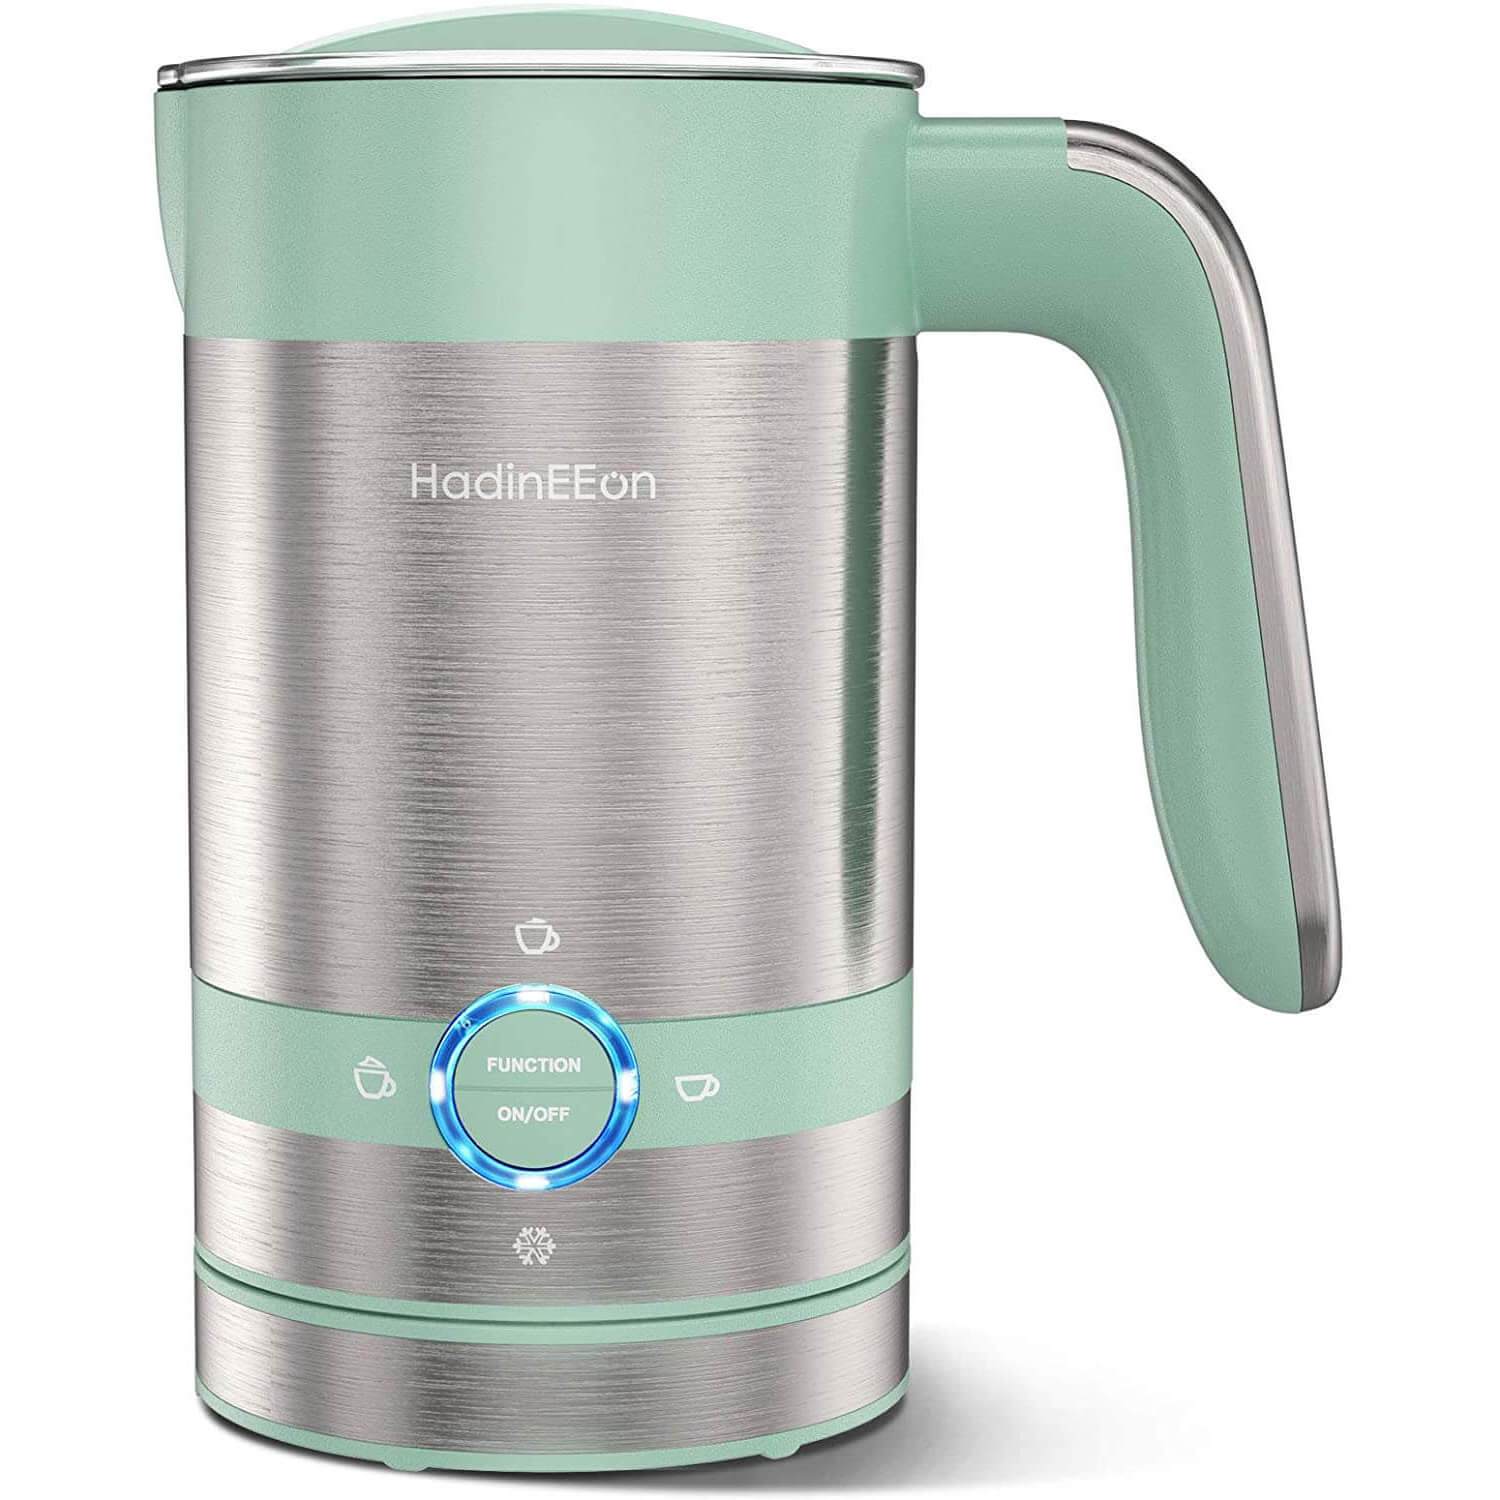 HadinEEon 4 in 1 Stainless Steel Milk Frother, Electric Milk Steamer